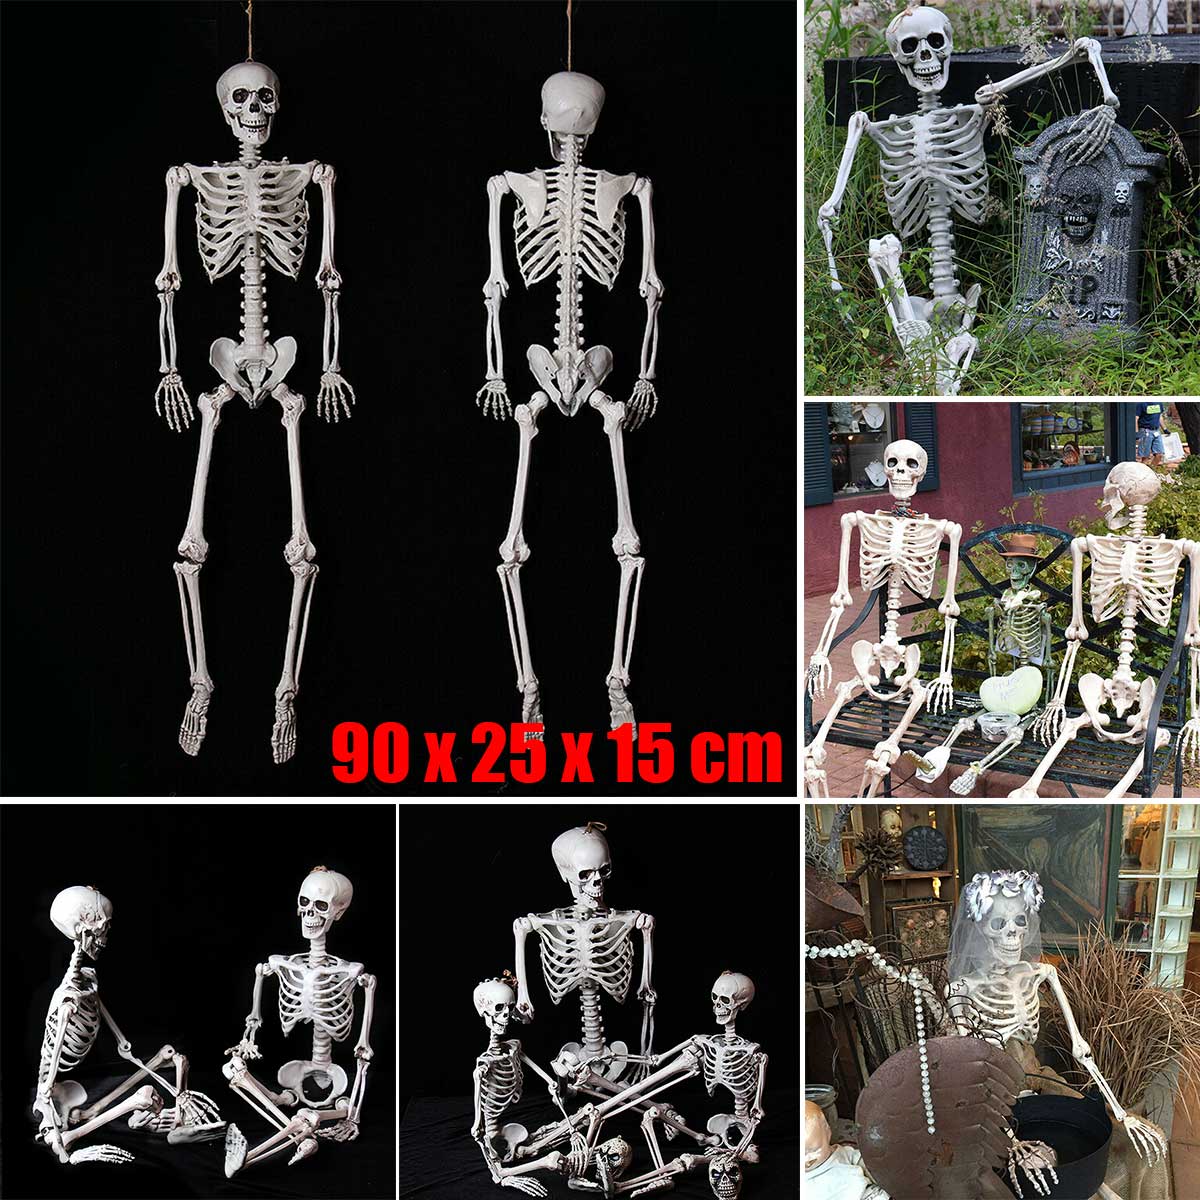 90cm-Human-Skeleton-Scary-Bones-Poseable-Hanging-Halloween-Prop-Party-Decorations-1573645-2